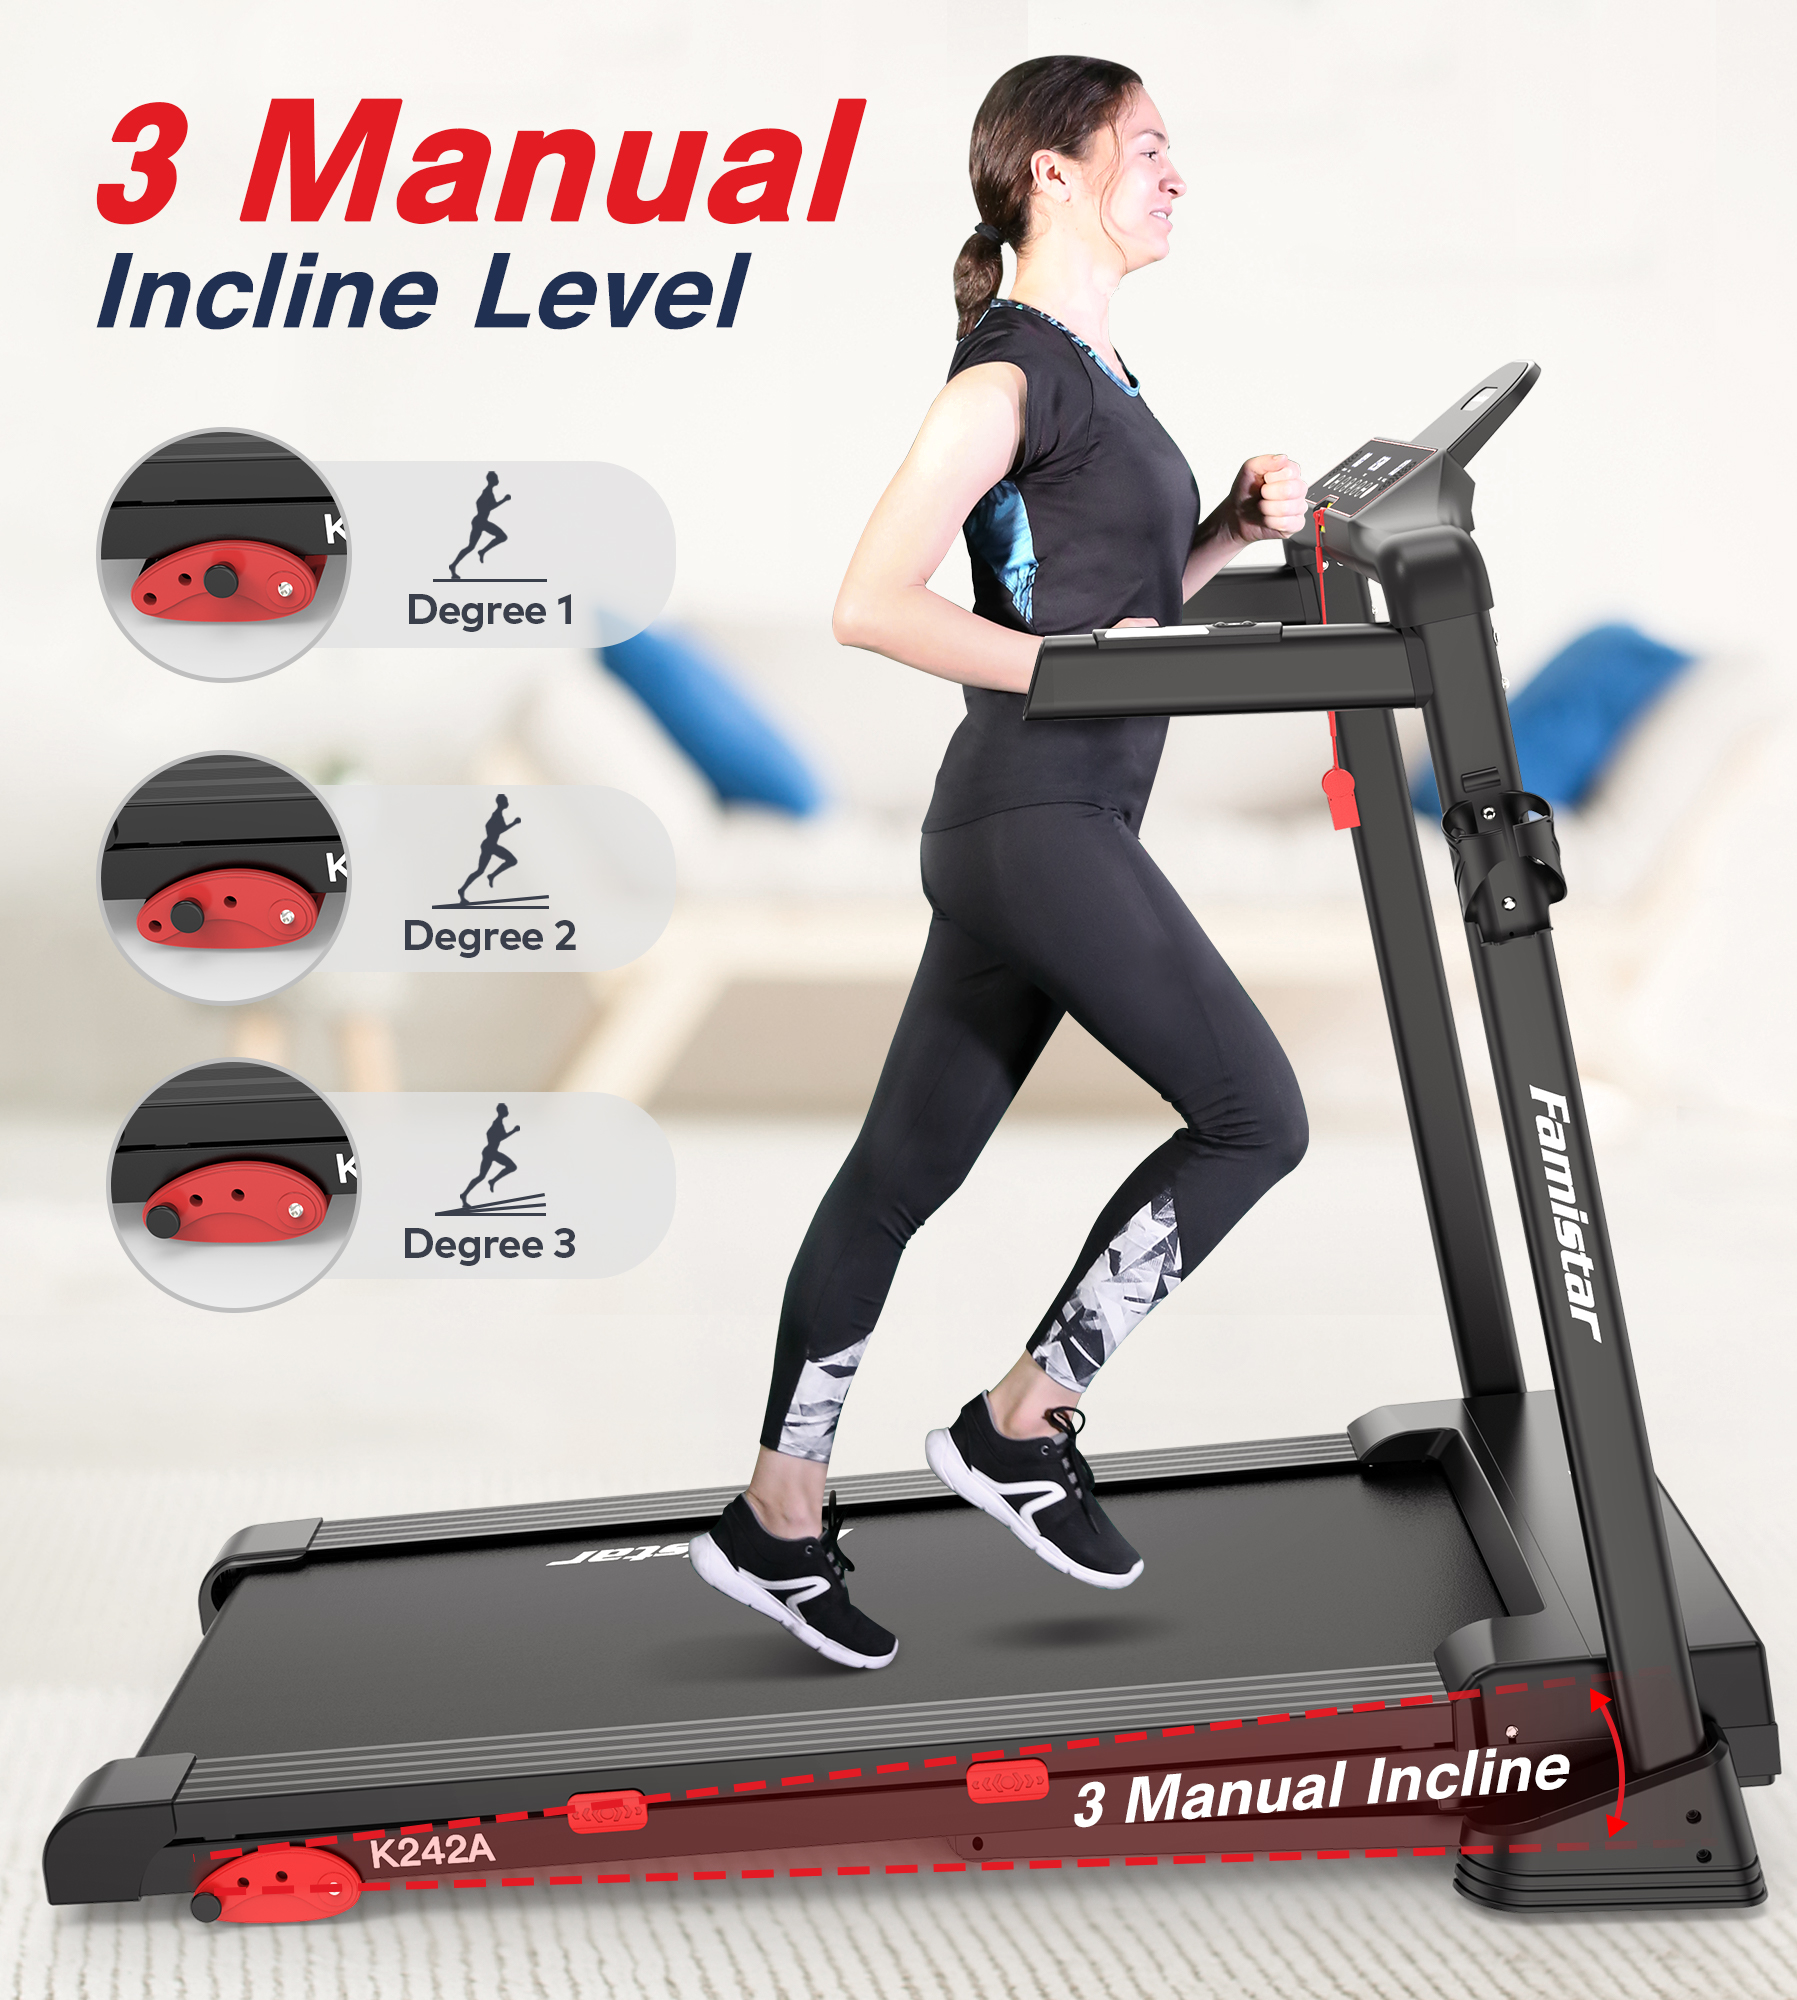 Folding Treadmill for Home with Adjustable Incline, Smart APP, 8MPH Speed, 250lbs, HiFi Bluetooth Speakers, 15 Programs 3 Modes, 3.0HP Foldable Compact Treadmill Walking Running Machine - image 2 of 13